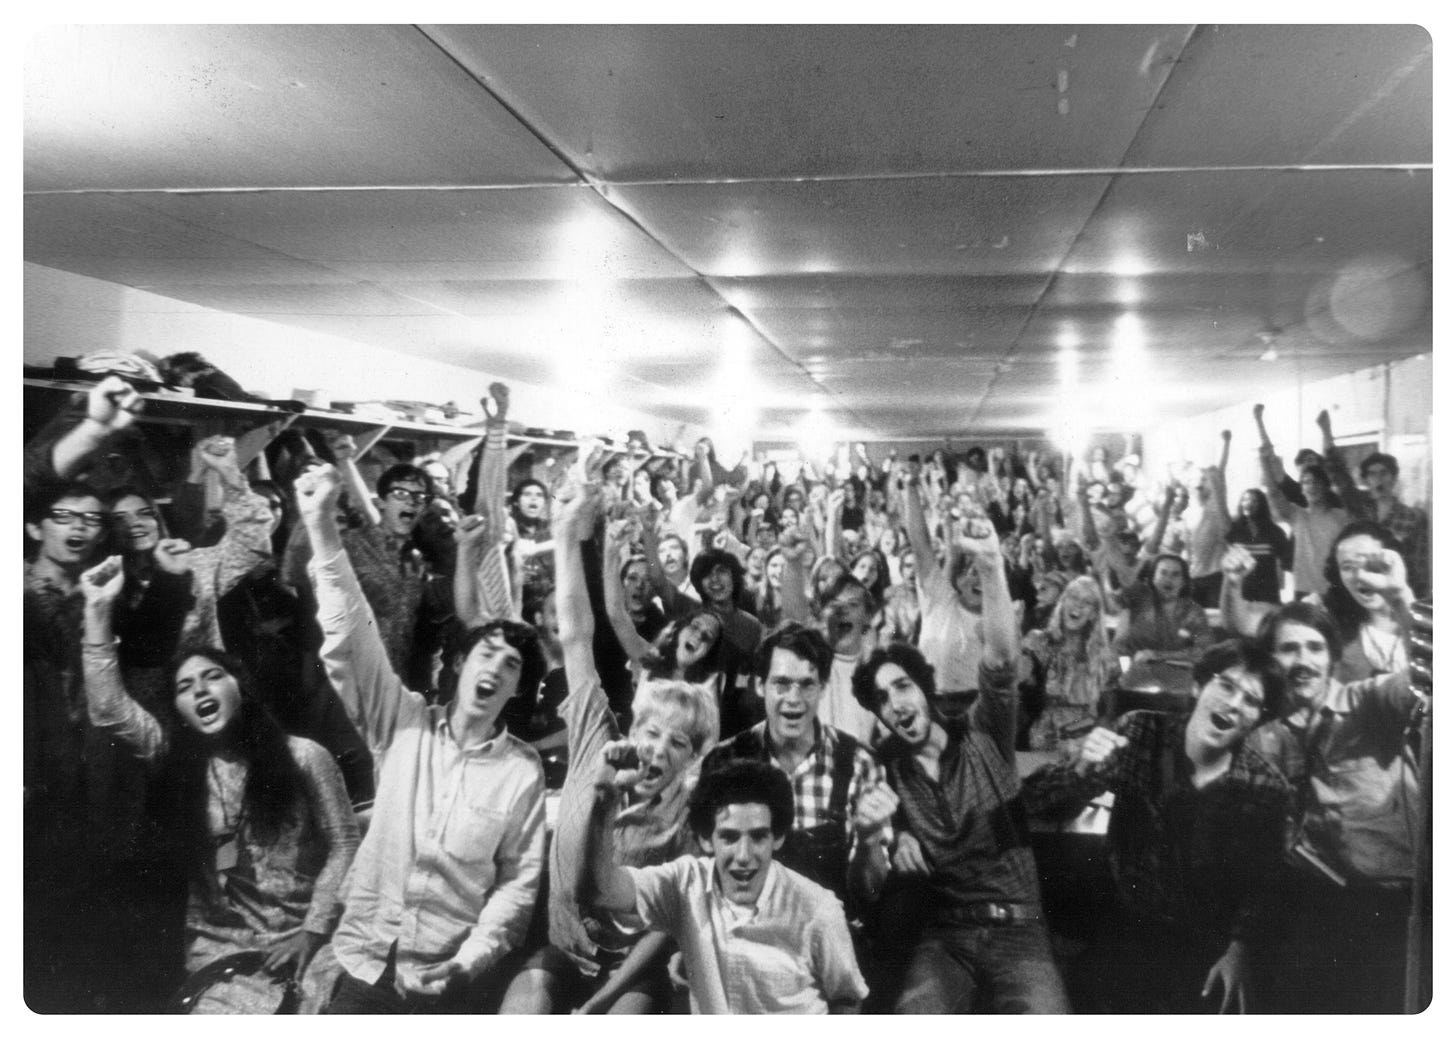 A black & white photo from the 1960's, found under google image search results 'Free Love' shows nearly 100 young people in a room cheering